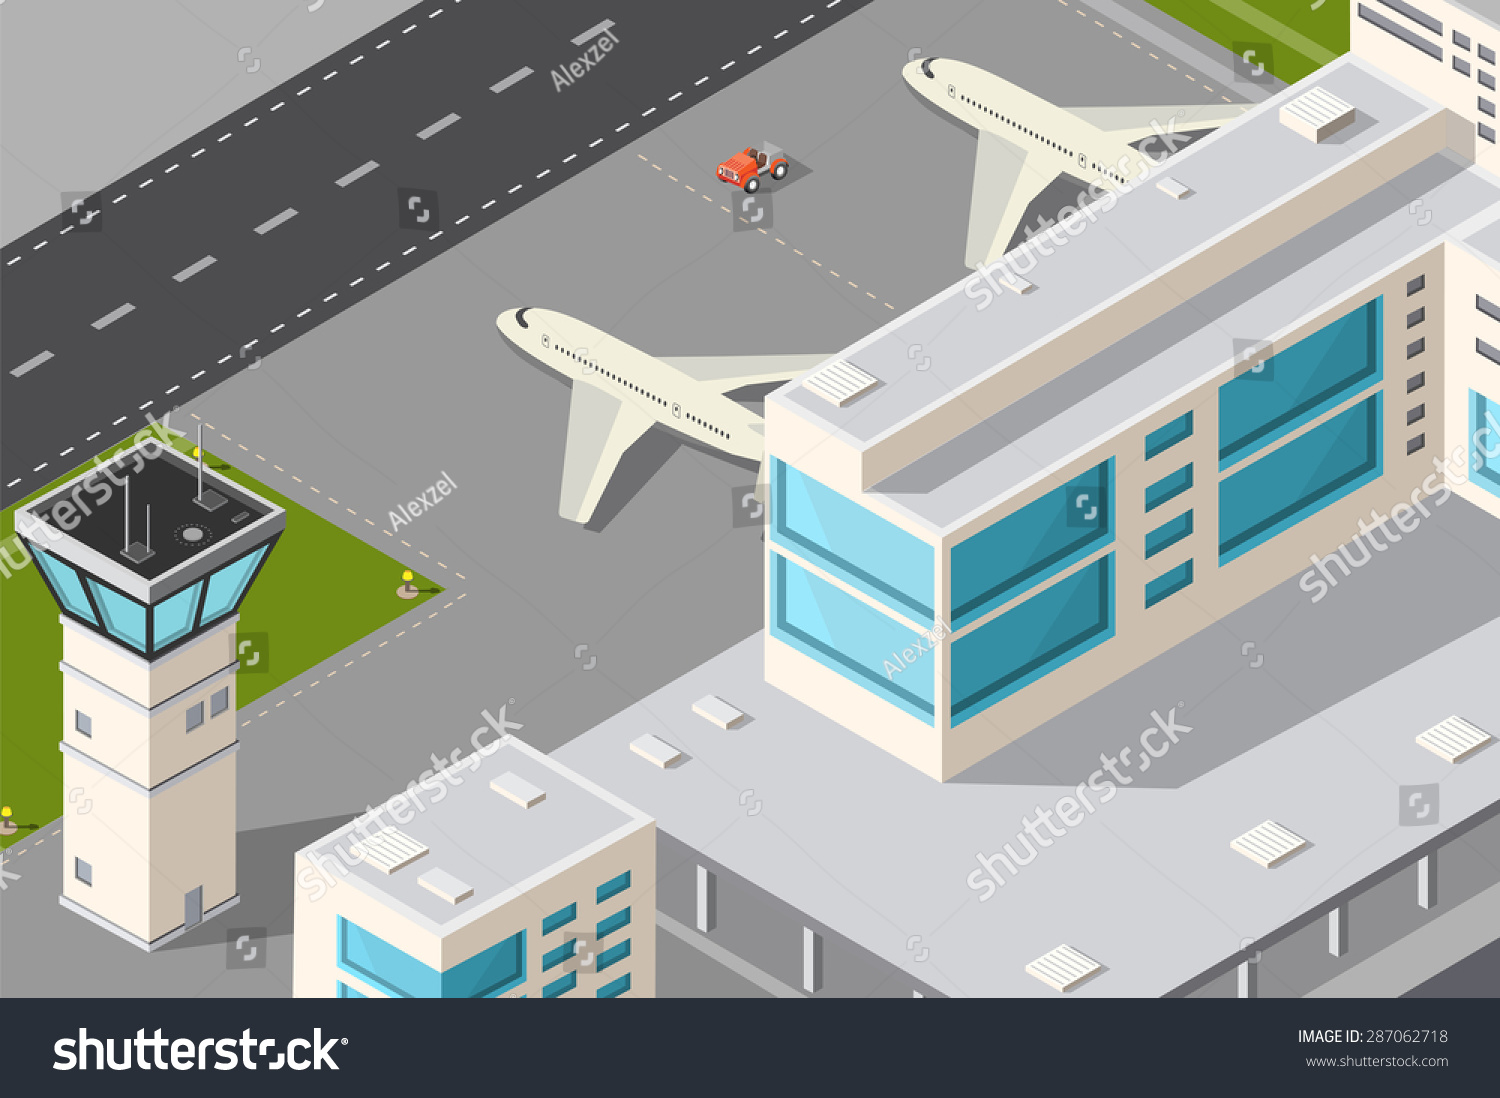 airport clipart - photo #44